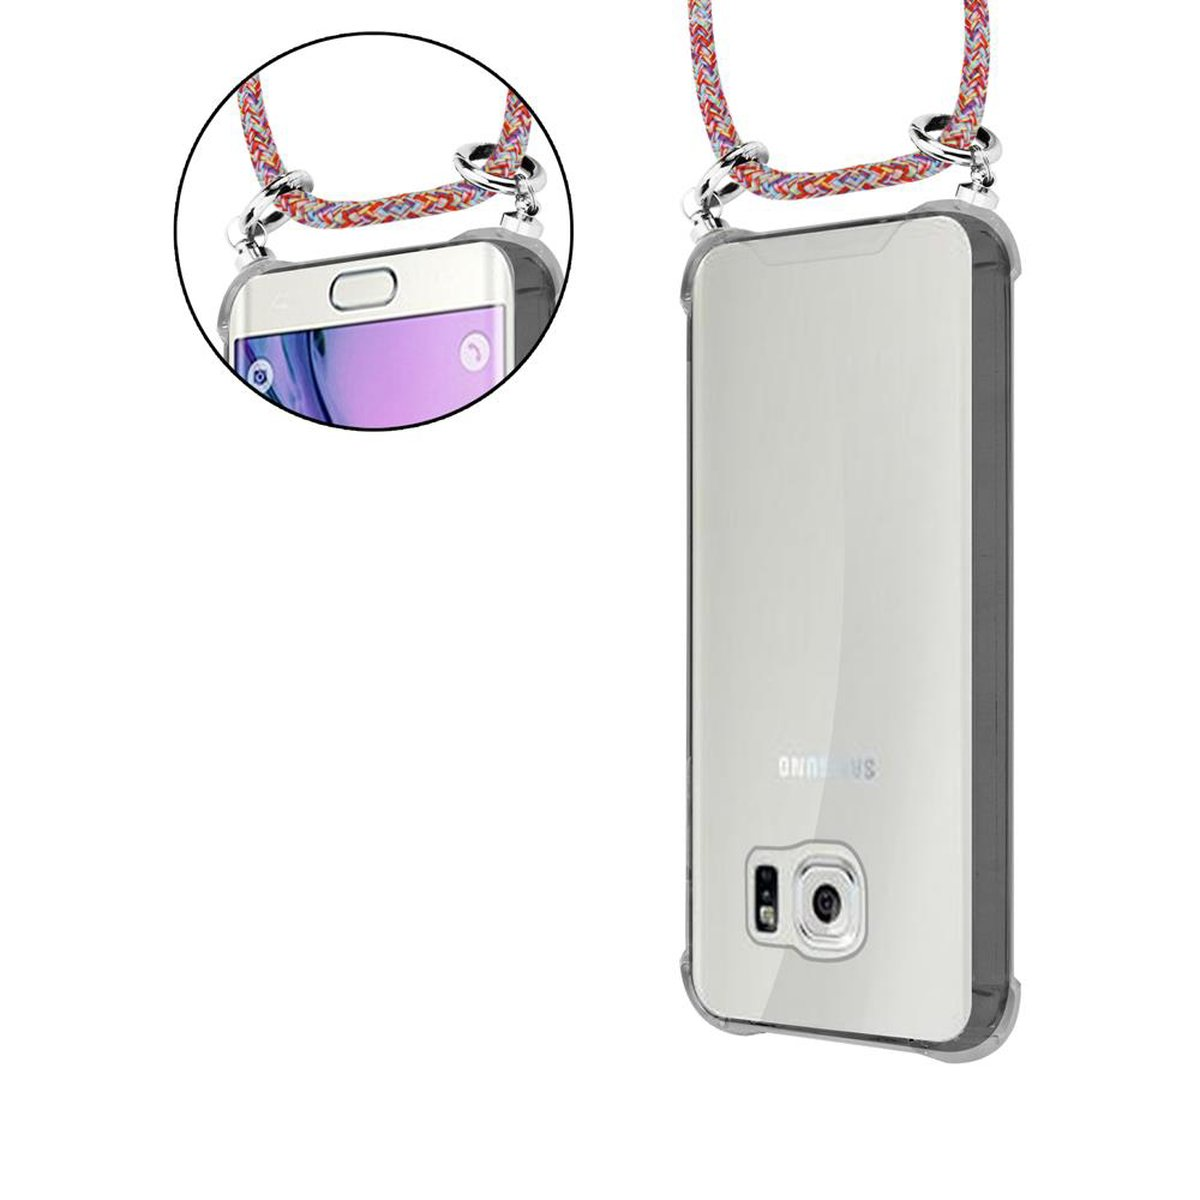 Handy abnehmbarer Silber COLORFUL Ringen, Hülle, Samsung, S6, mit Galaxy und Band Kette PARROT CADORABO Kordel Backcover,